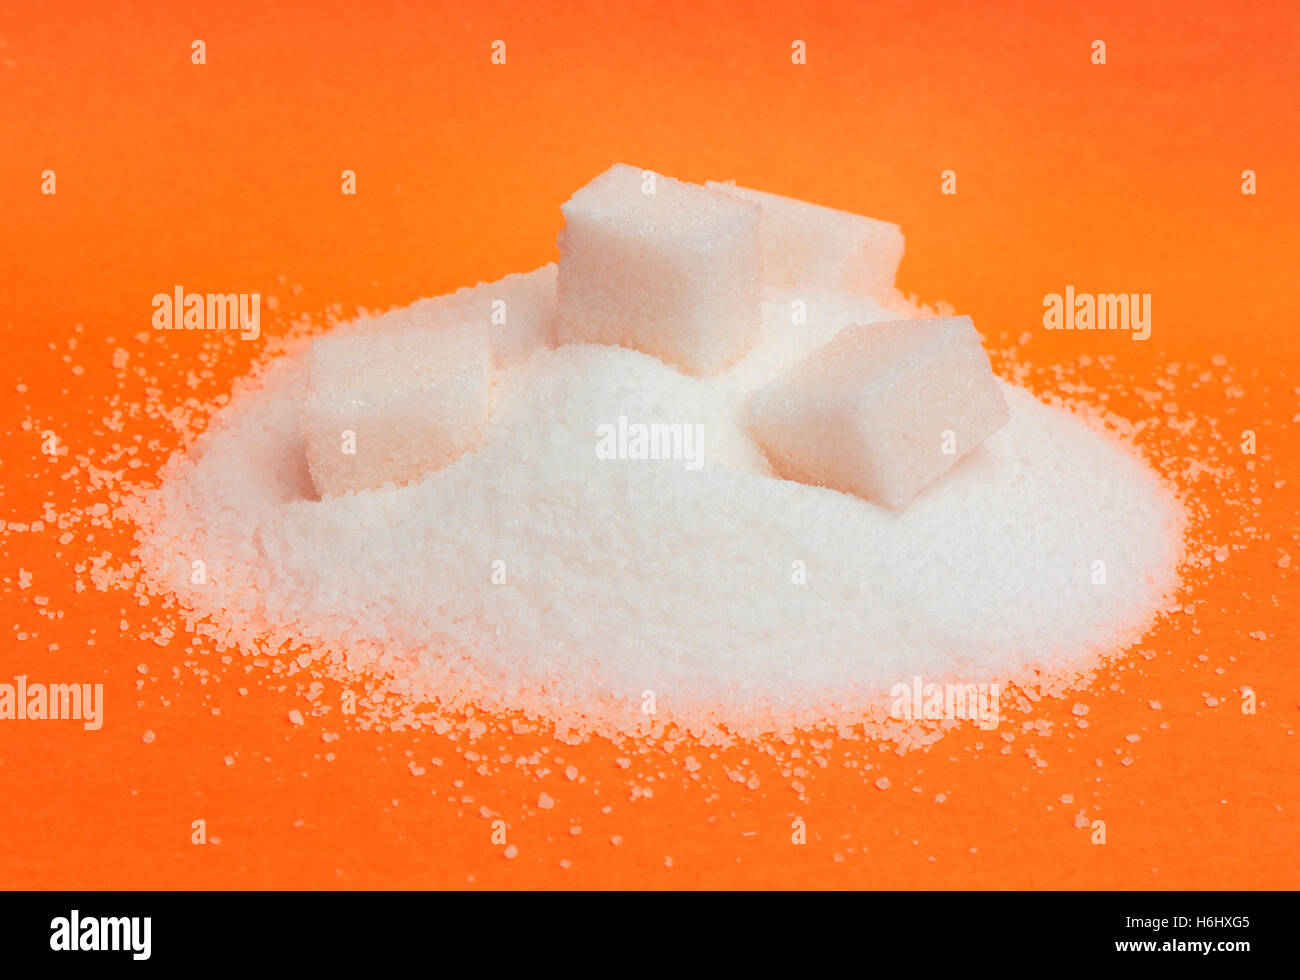 Pile of white sugar isolated on red background Stock Photo